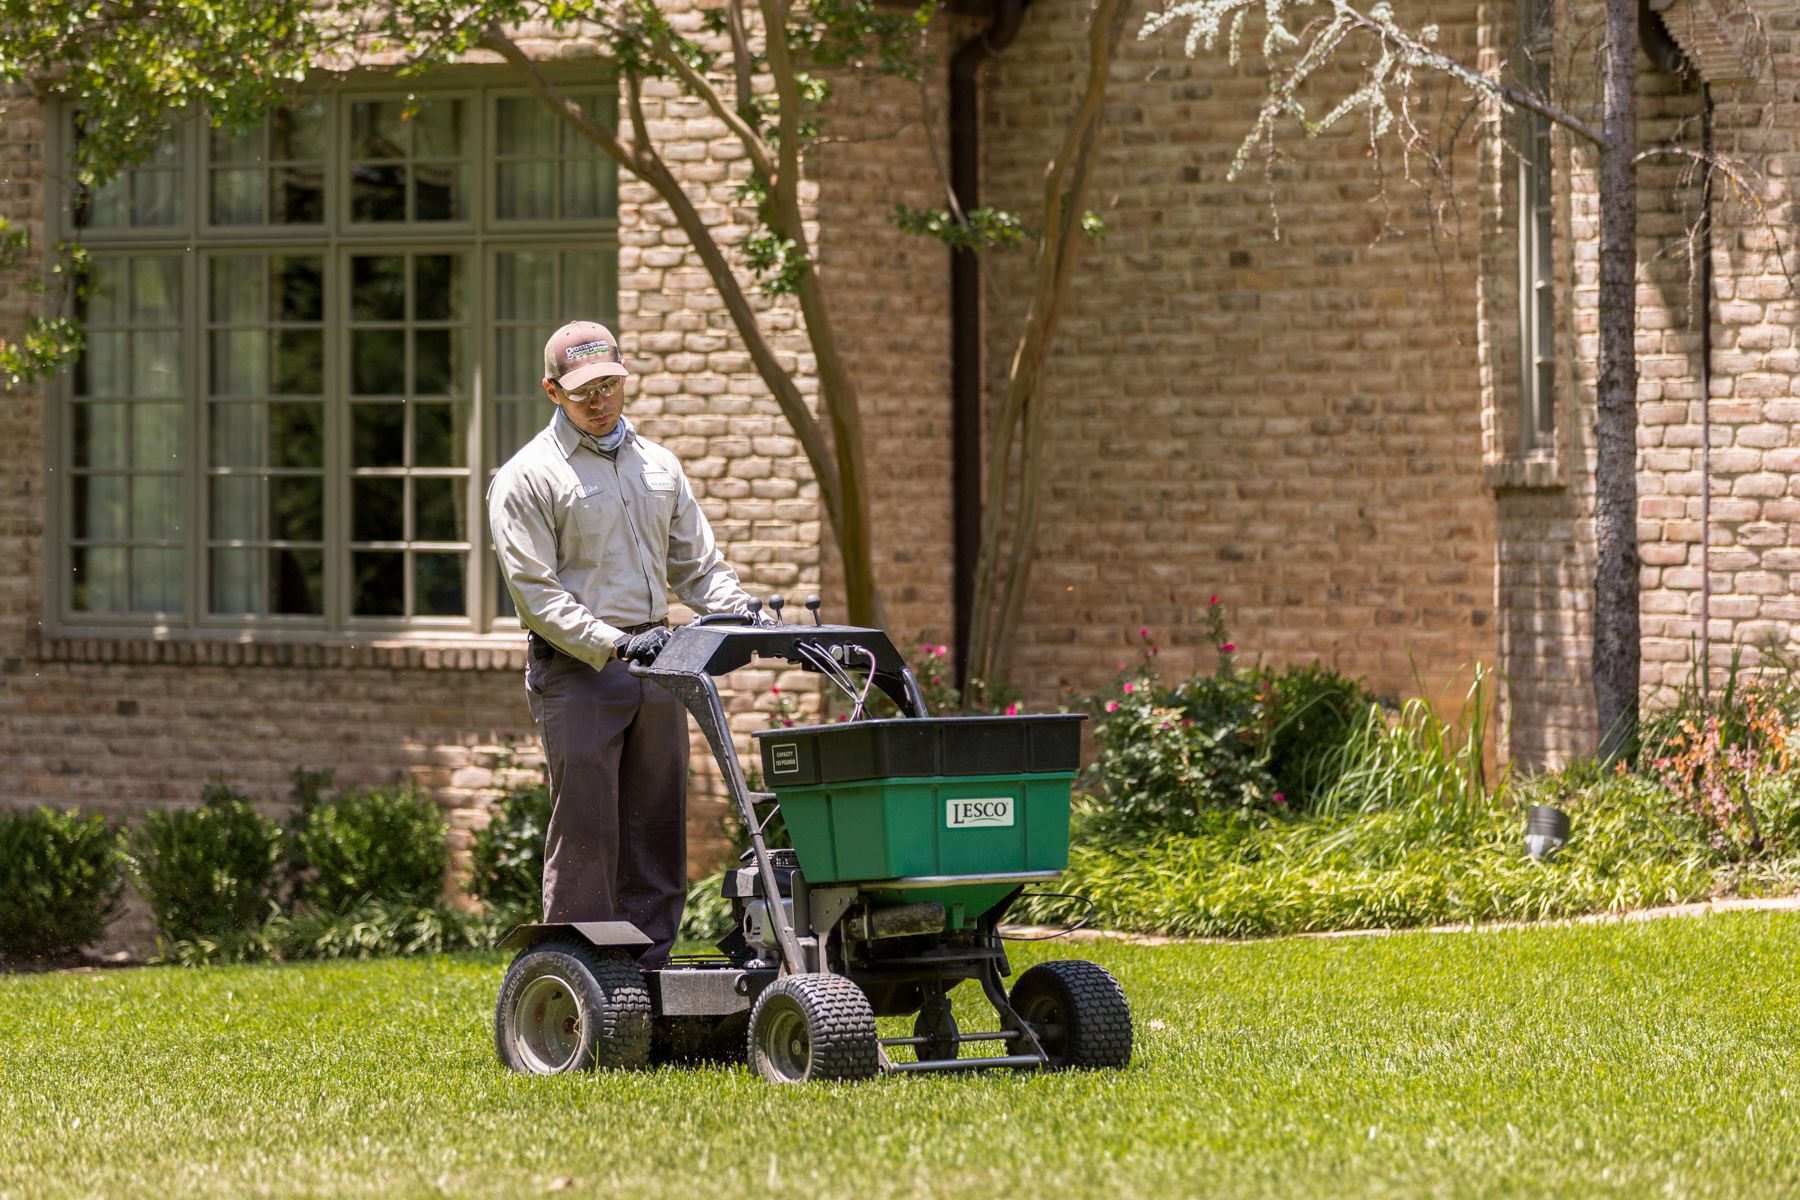 5 Reasons to Consider a Career as a Lawn Care Technician